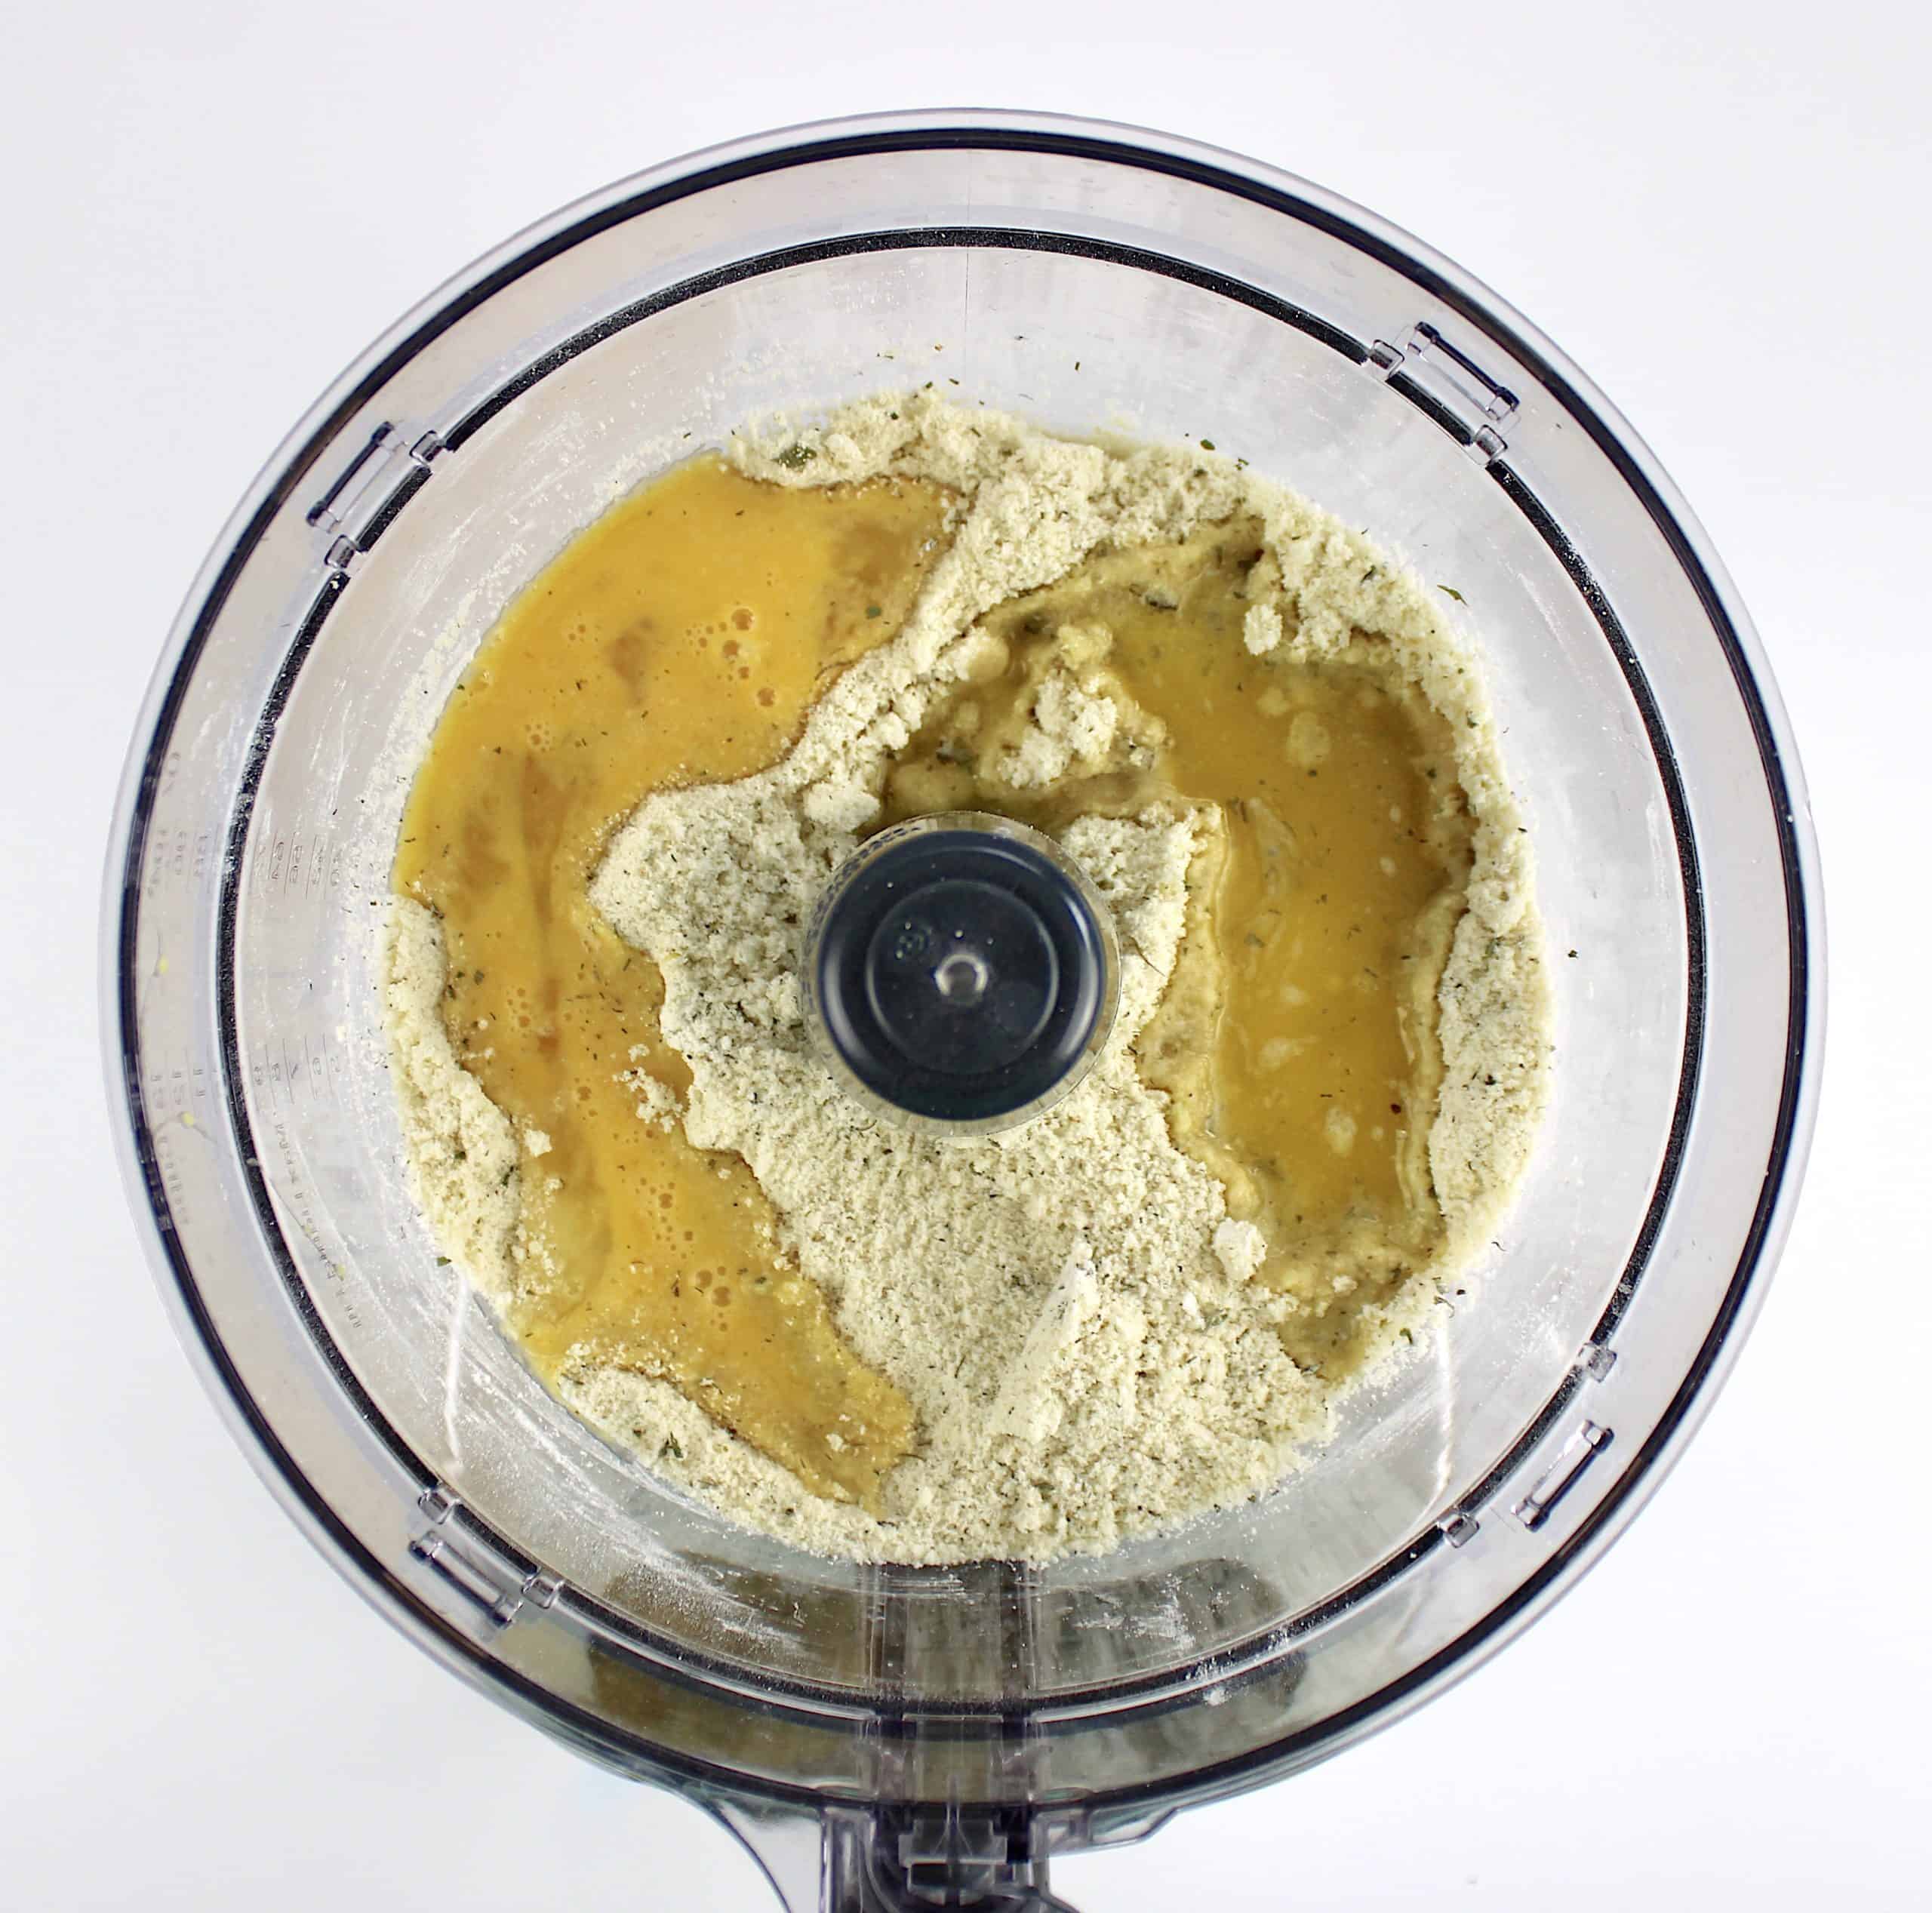 Keto Ranch Crackers wet and dry ingredients in food processor unmixed